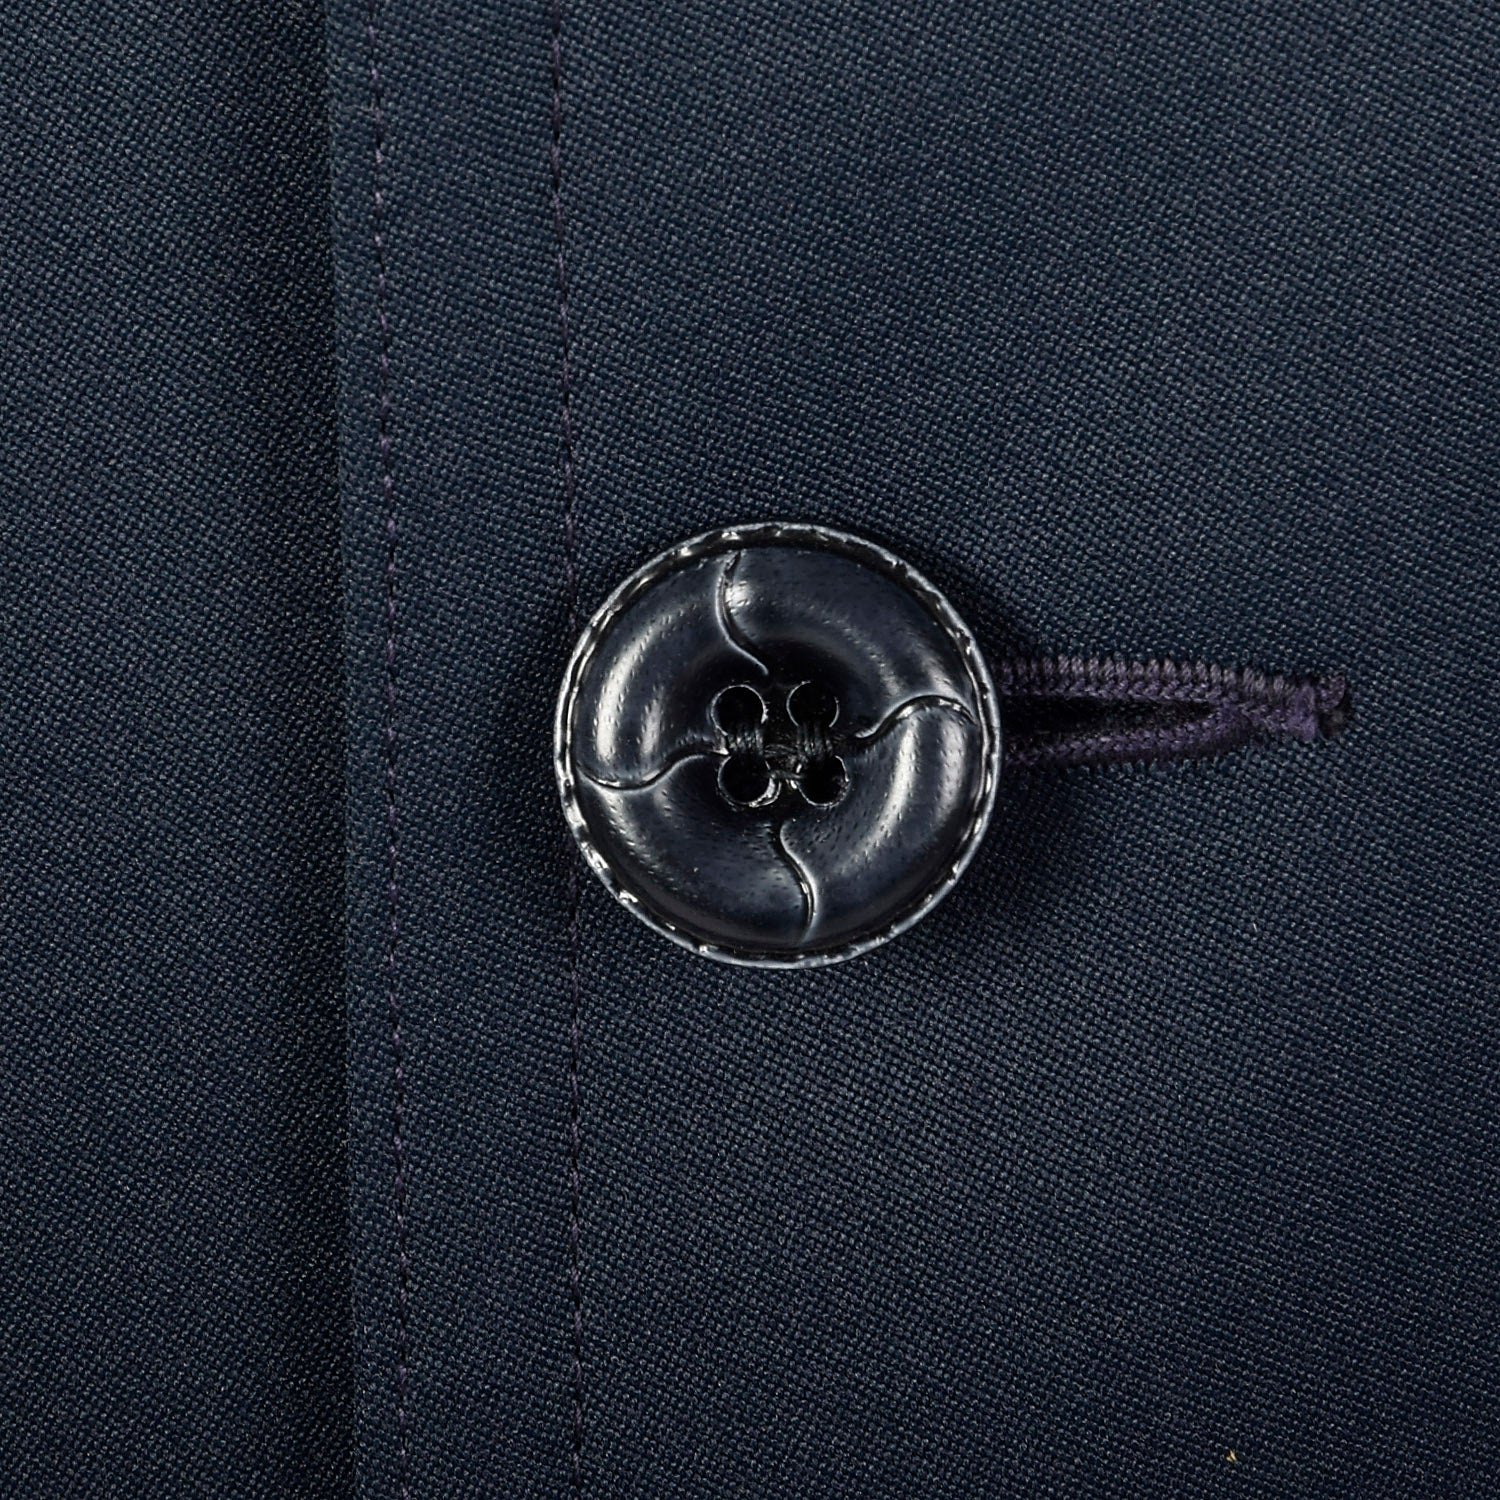 1970s Navy Overcoat with Removable Liner